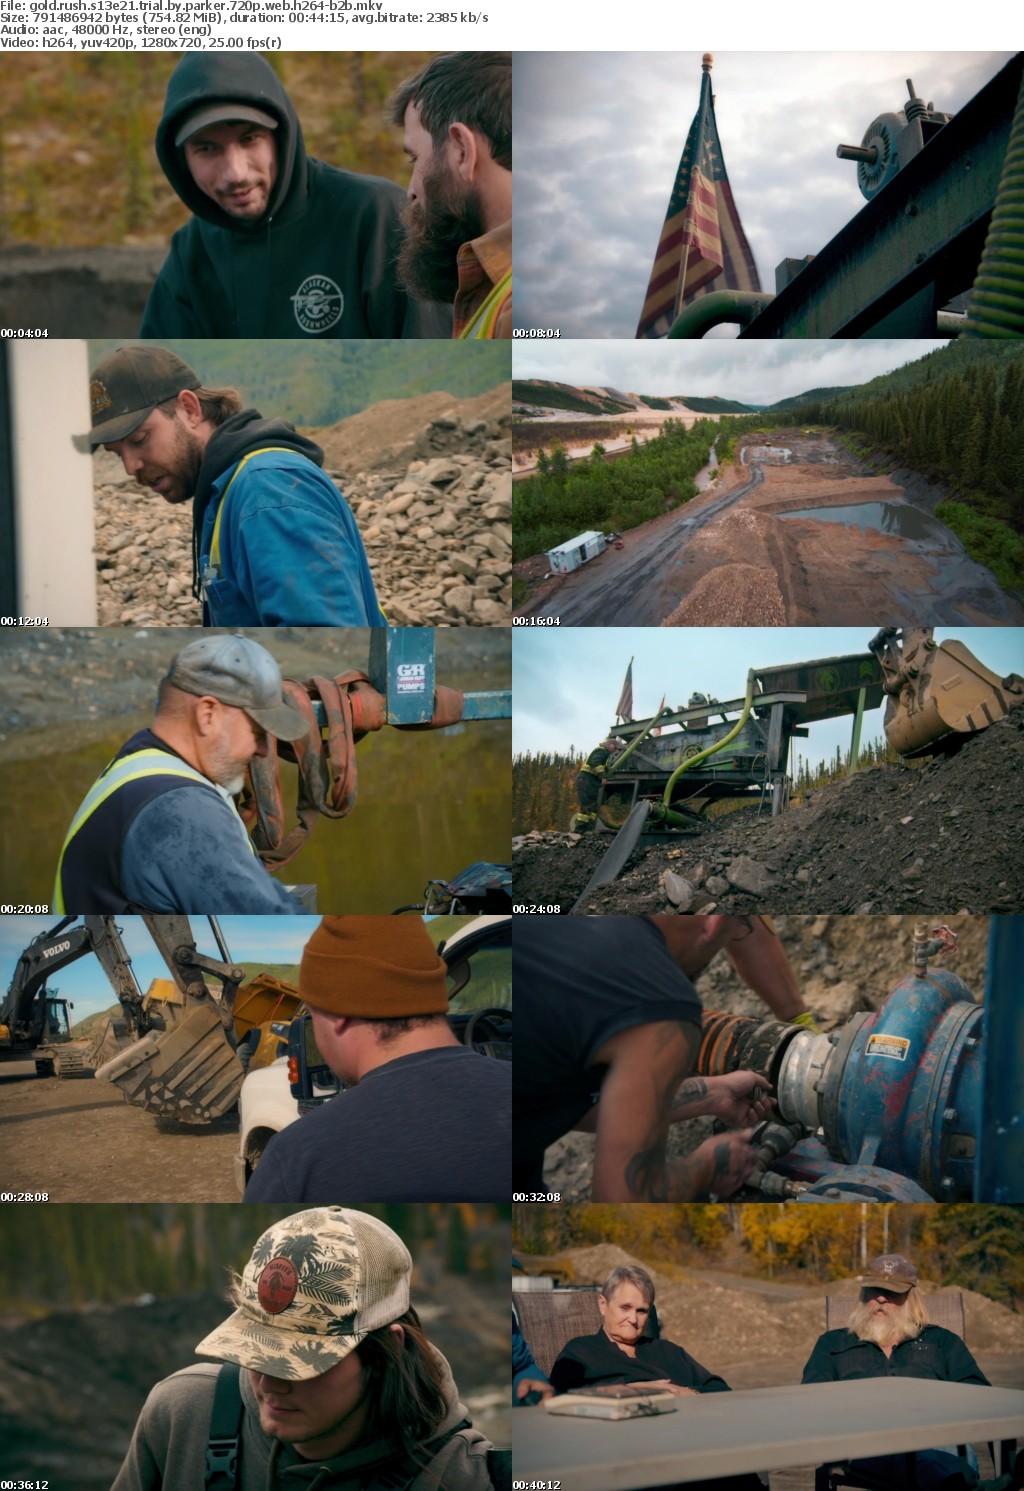 Gold Rush S13E21 Trial By Parker 720p WEB h264-B2B